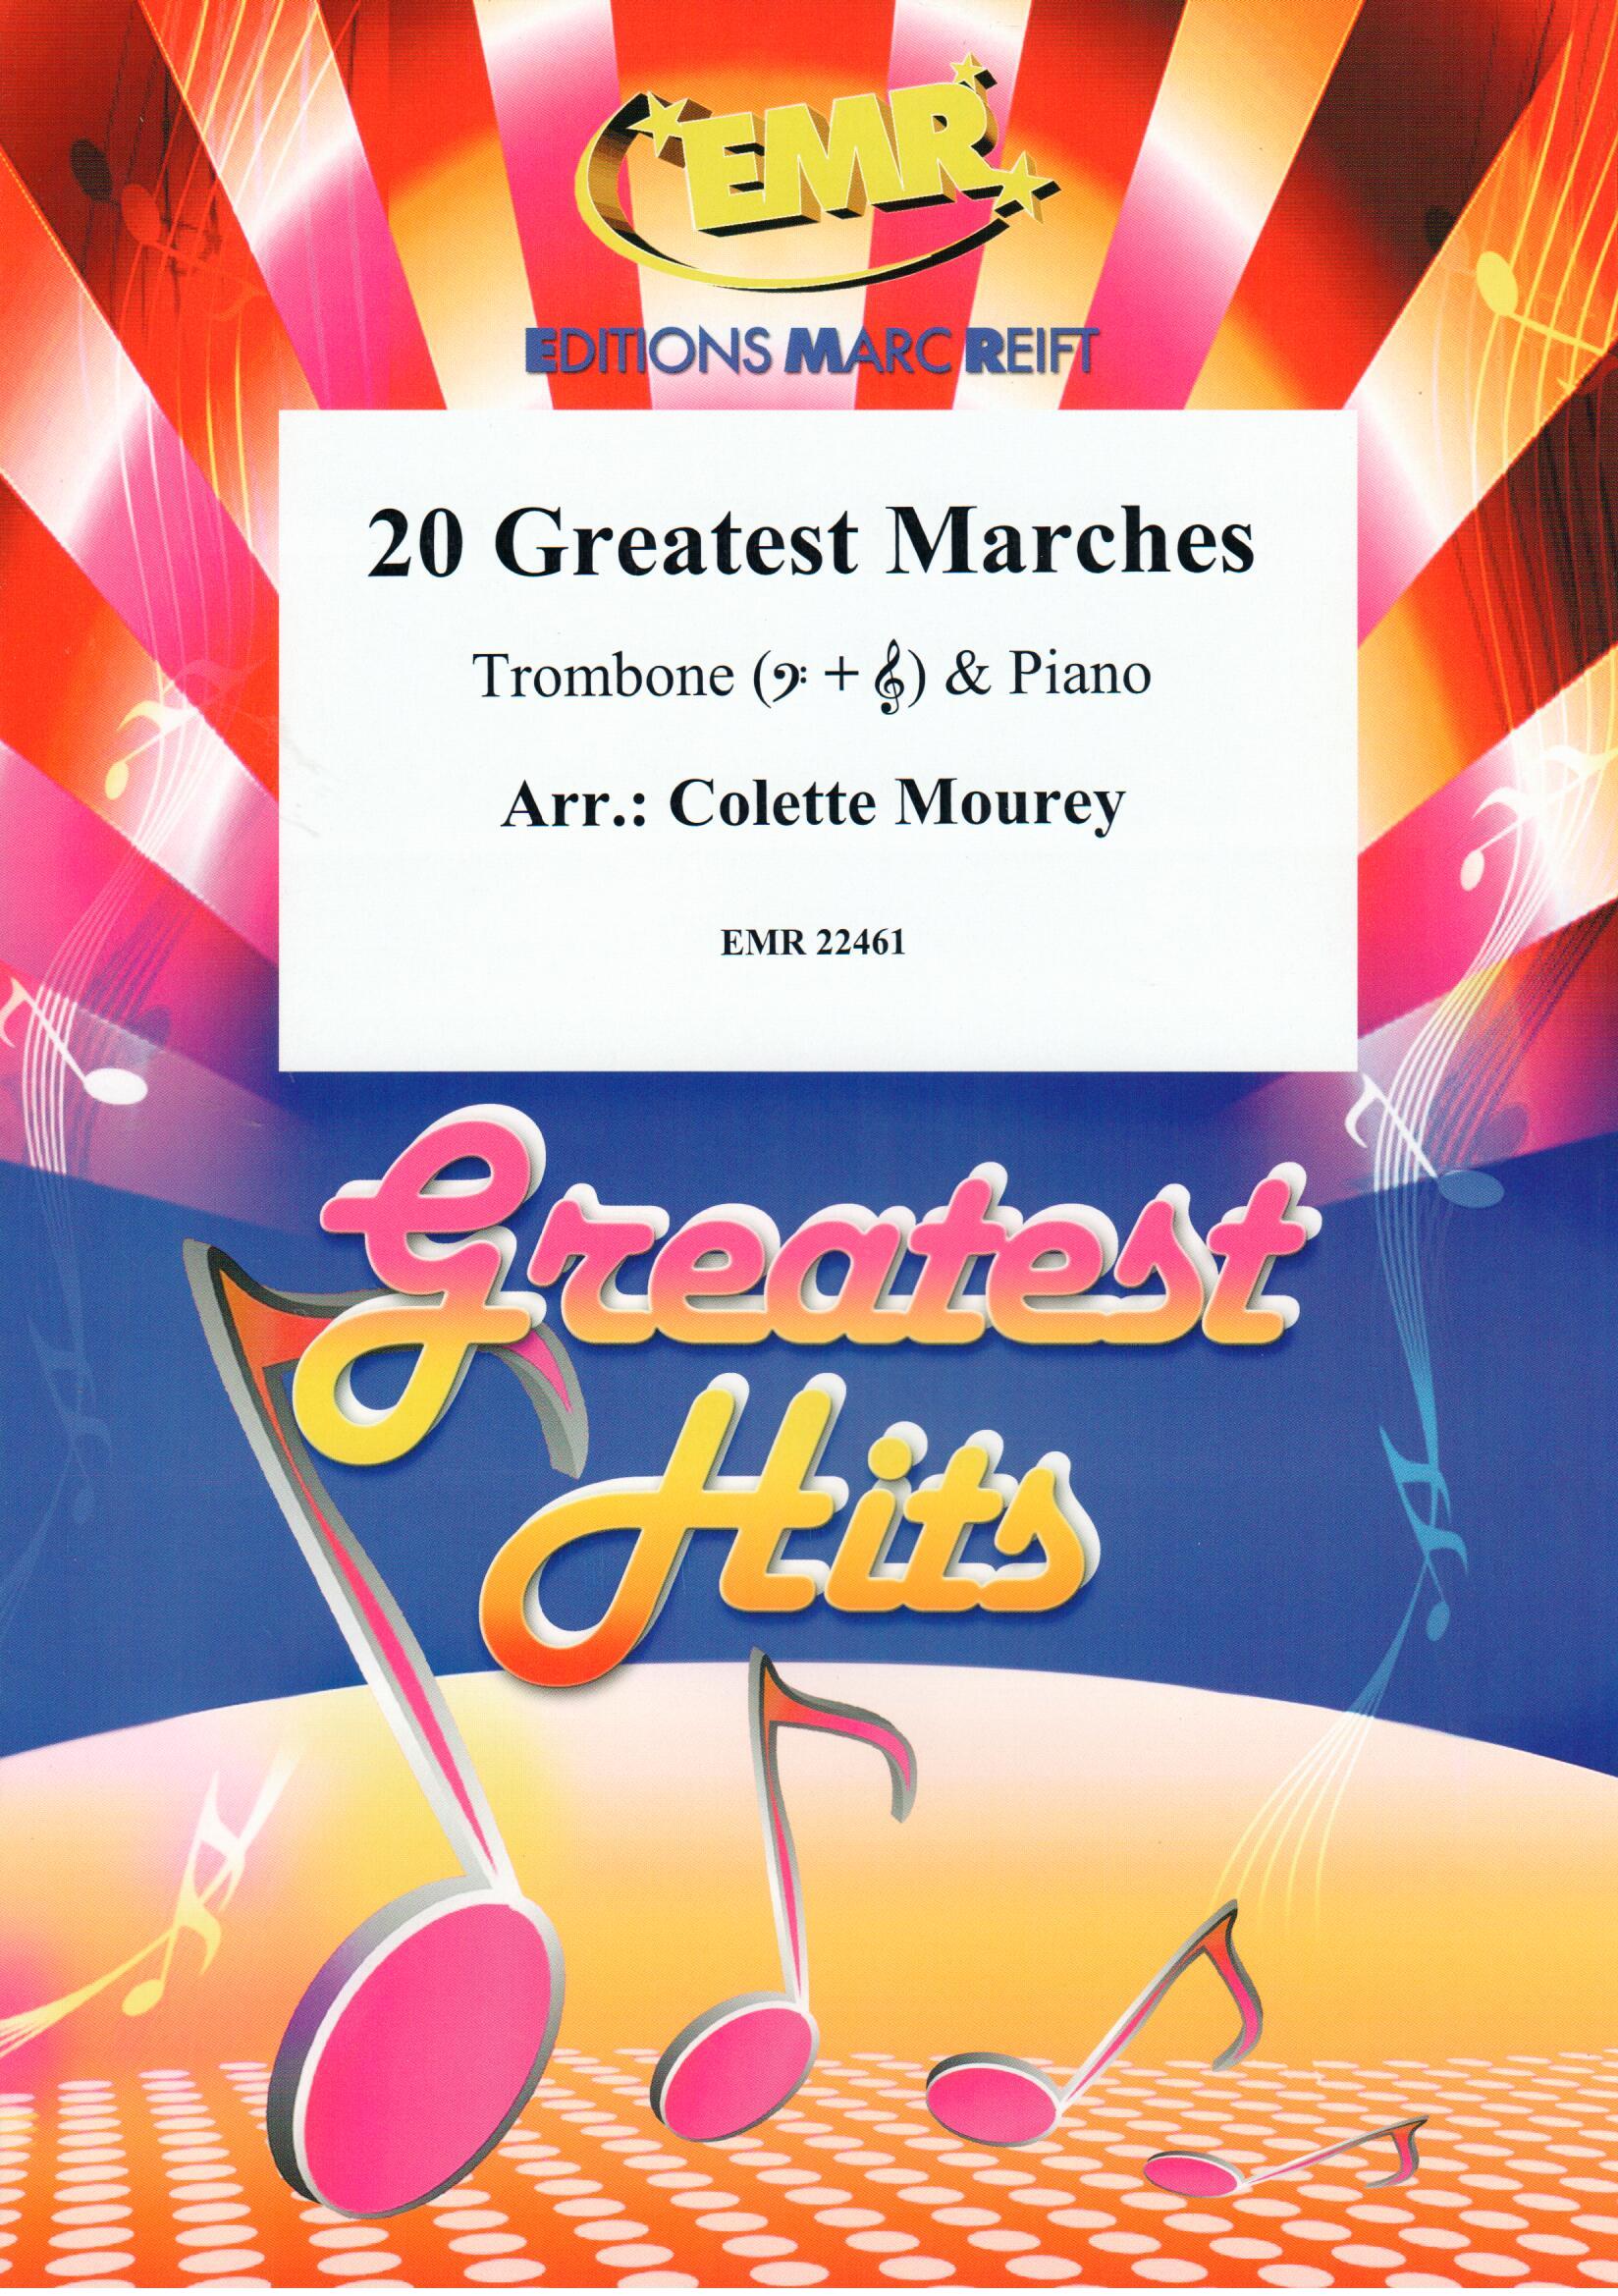 20 GREATEST MARCHES, SOLOS - Trombone